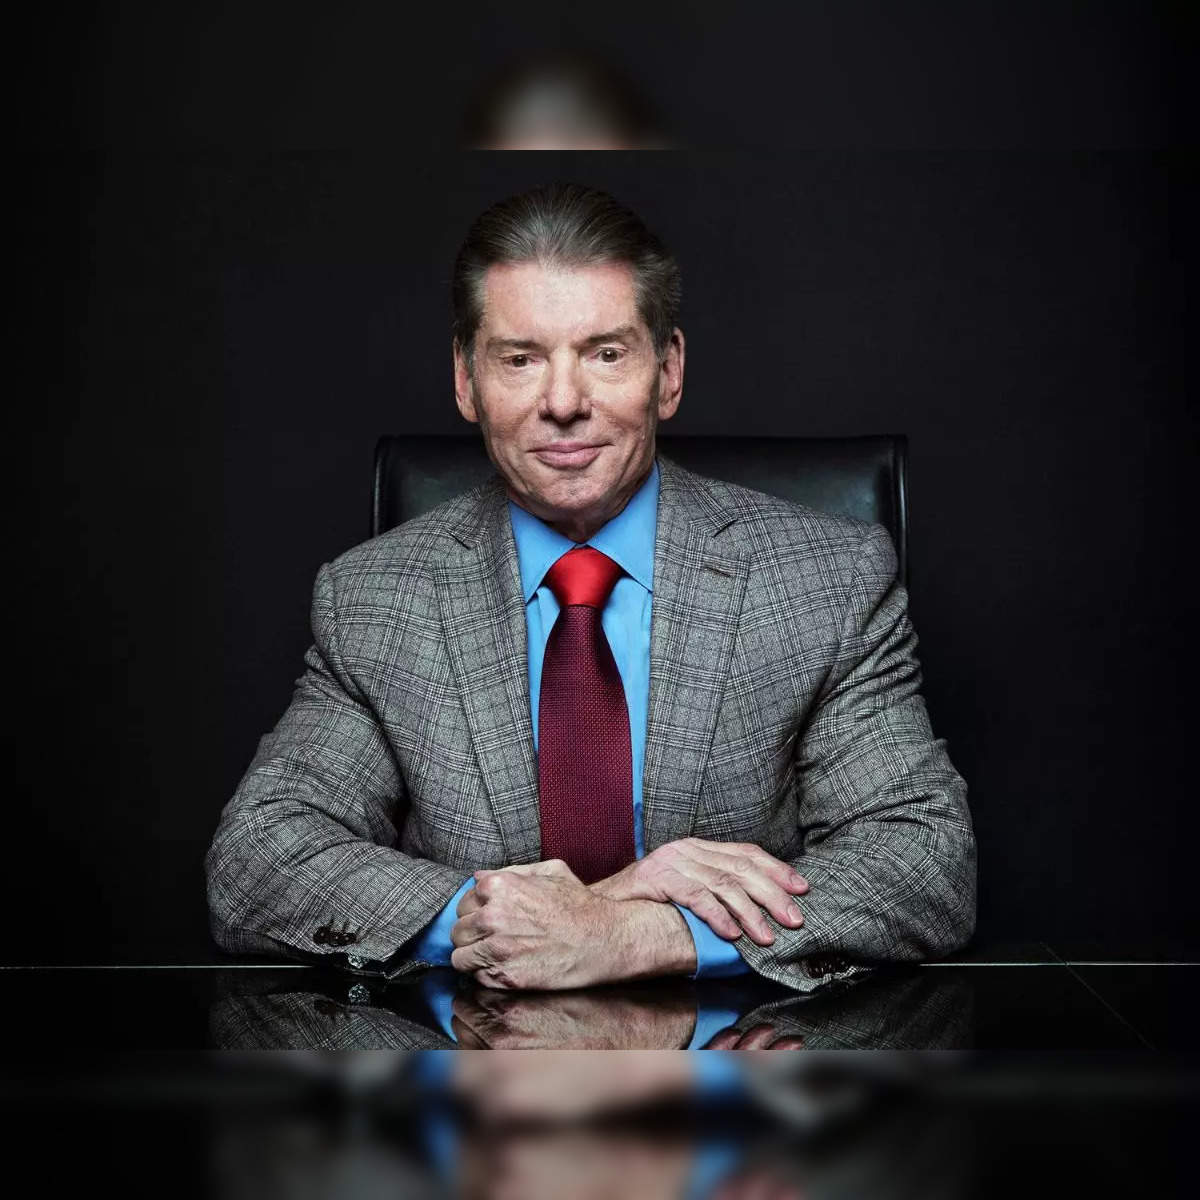 wwe: WWE chairman Vince McMahon steps down over misconduct probe - The  Economic Times